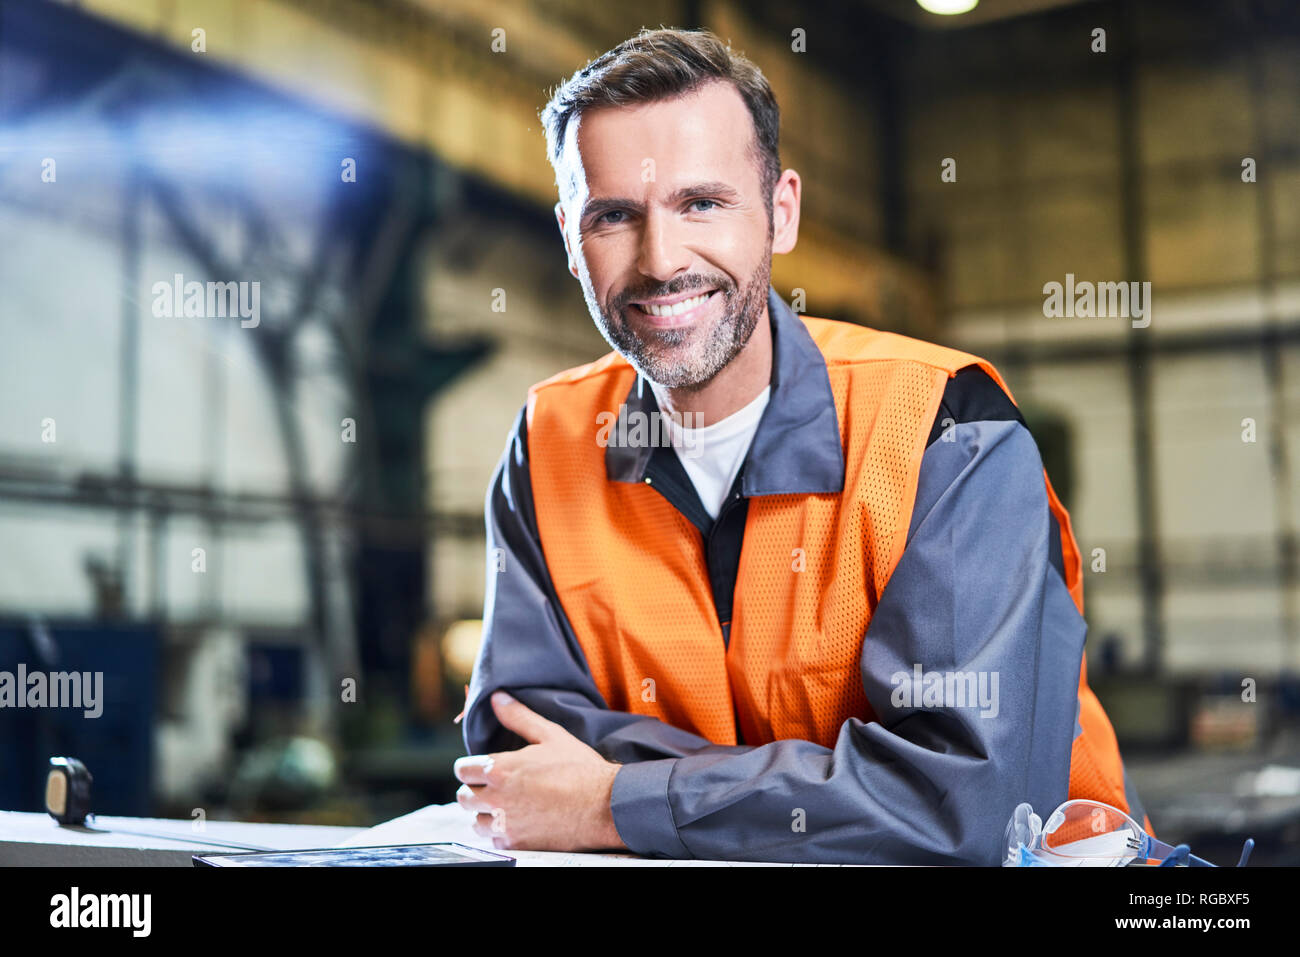 Portrait of smiling man in factory wearing safety vest Stock Photo